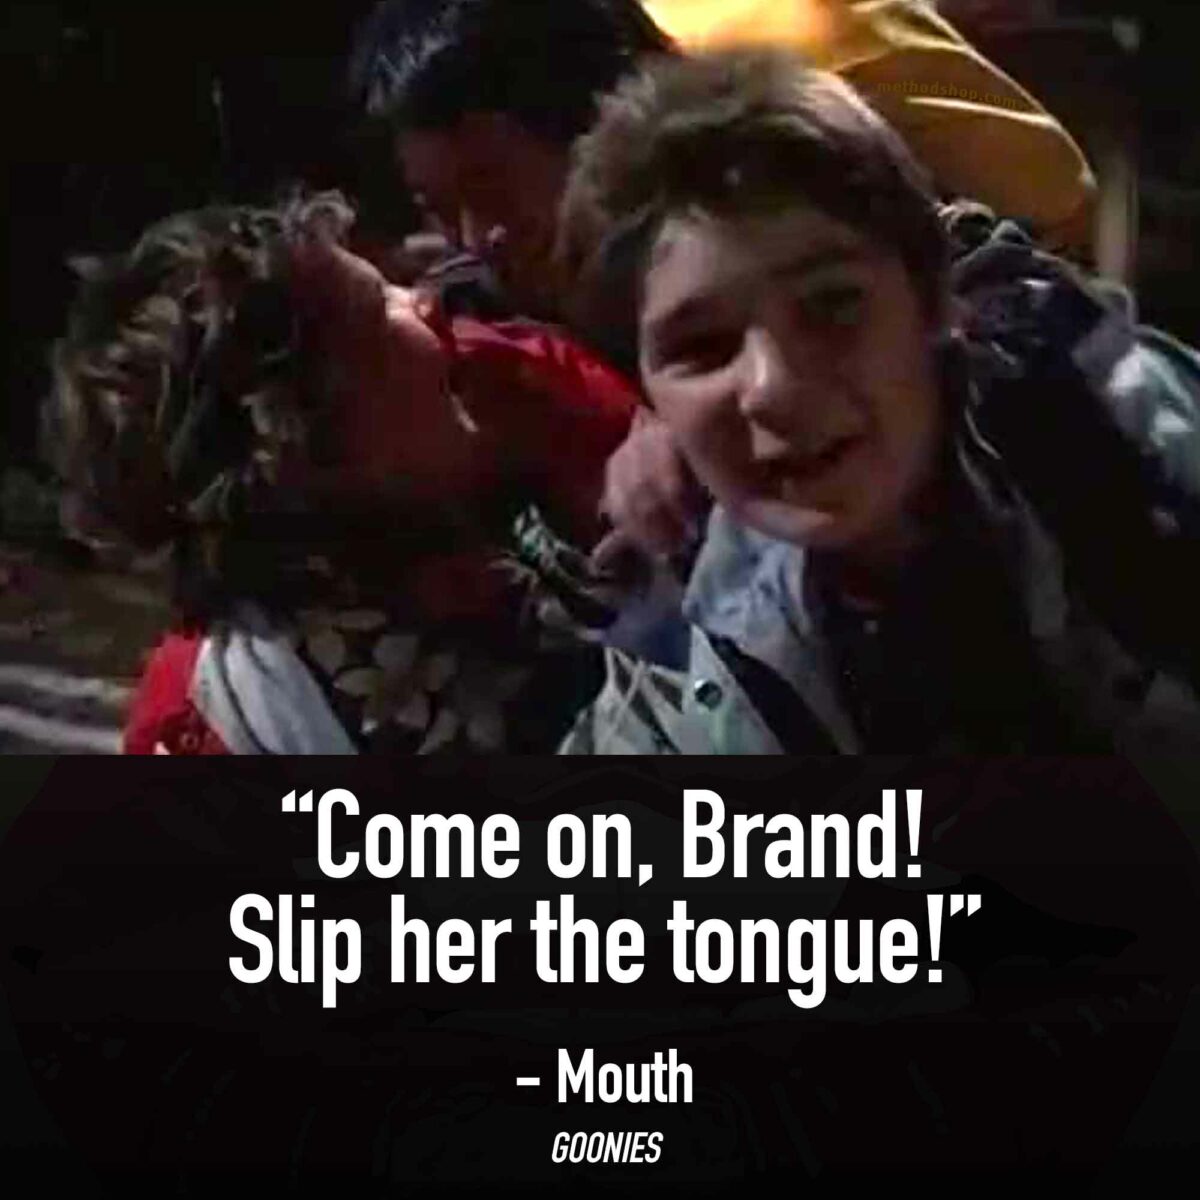 Goonies Quotes - Shame, Shame! I Know Your Name!